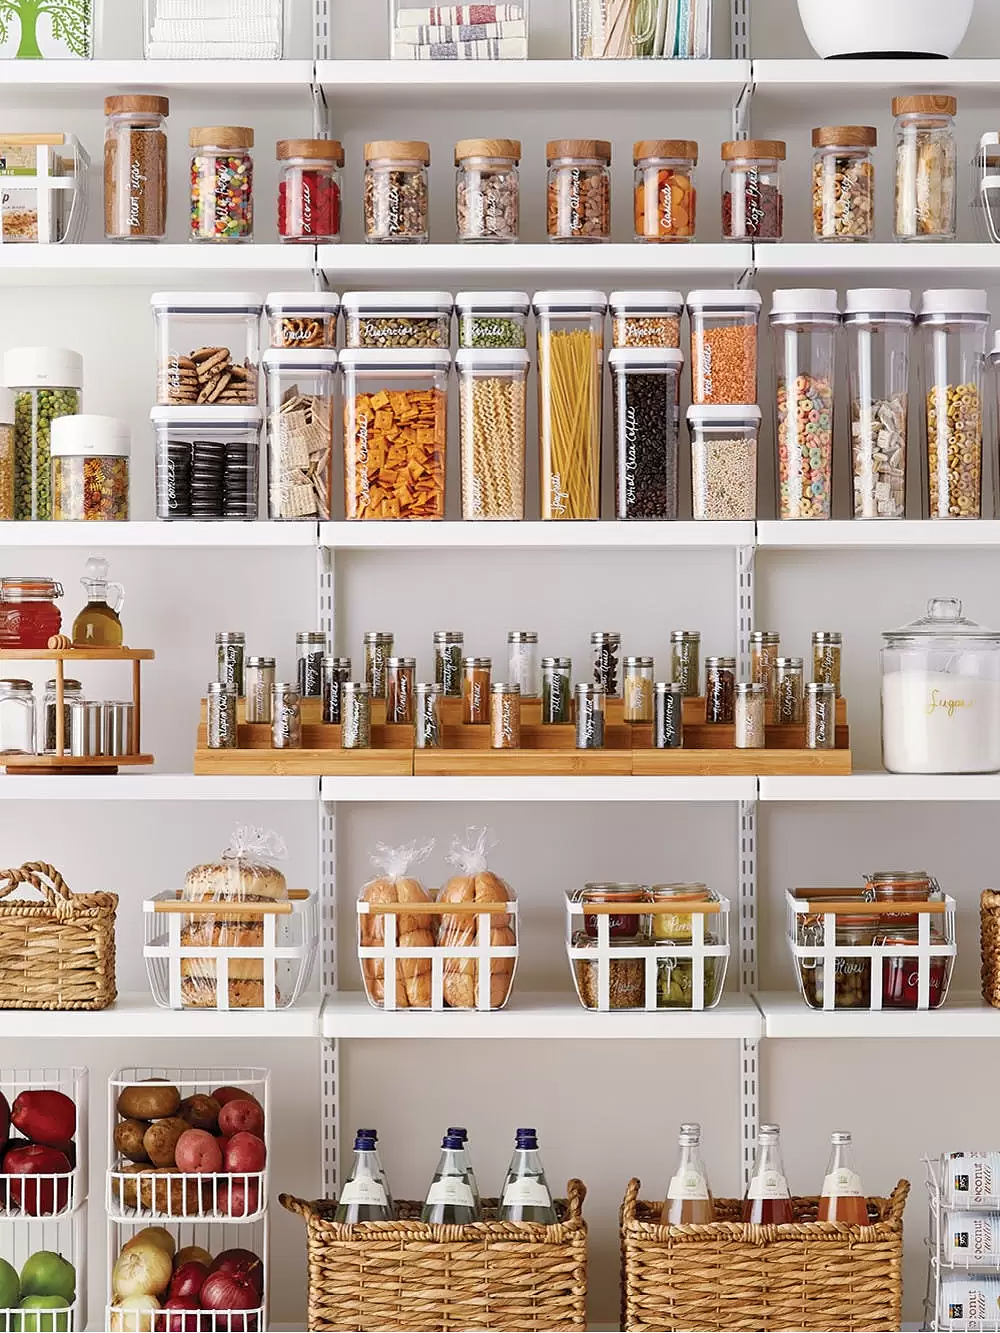 The Container Store and Instacart Just Made Organizing Your Home